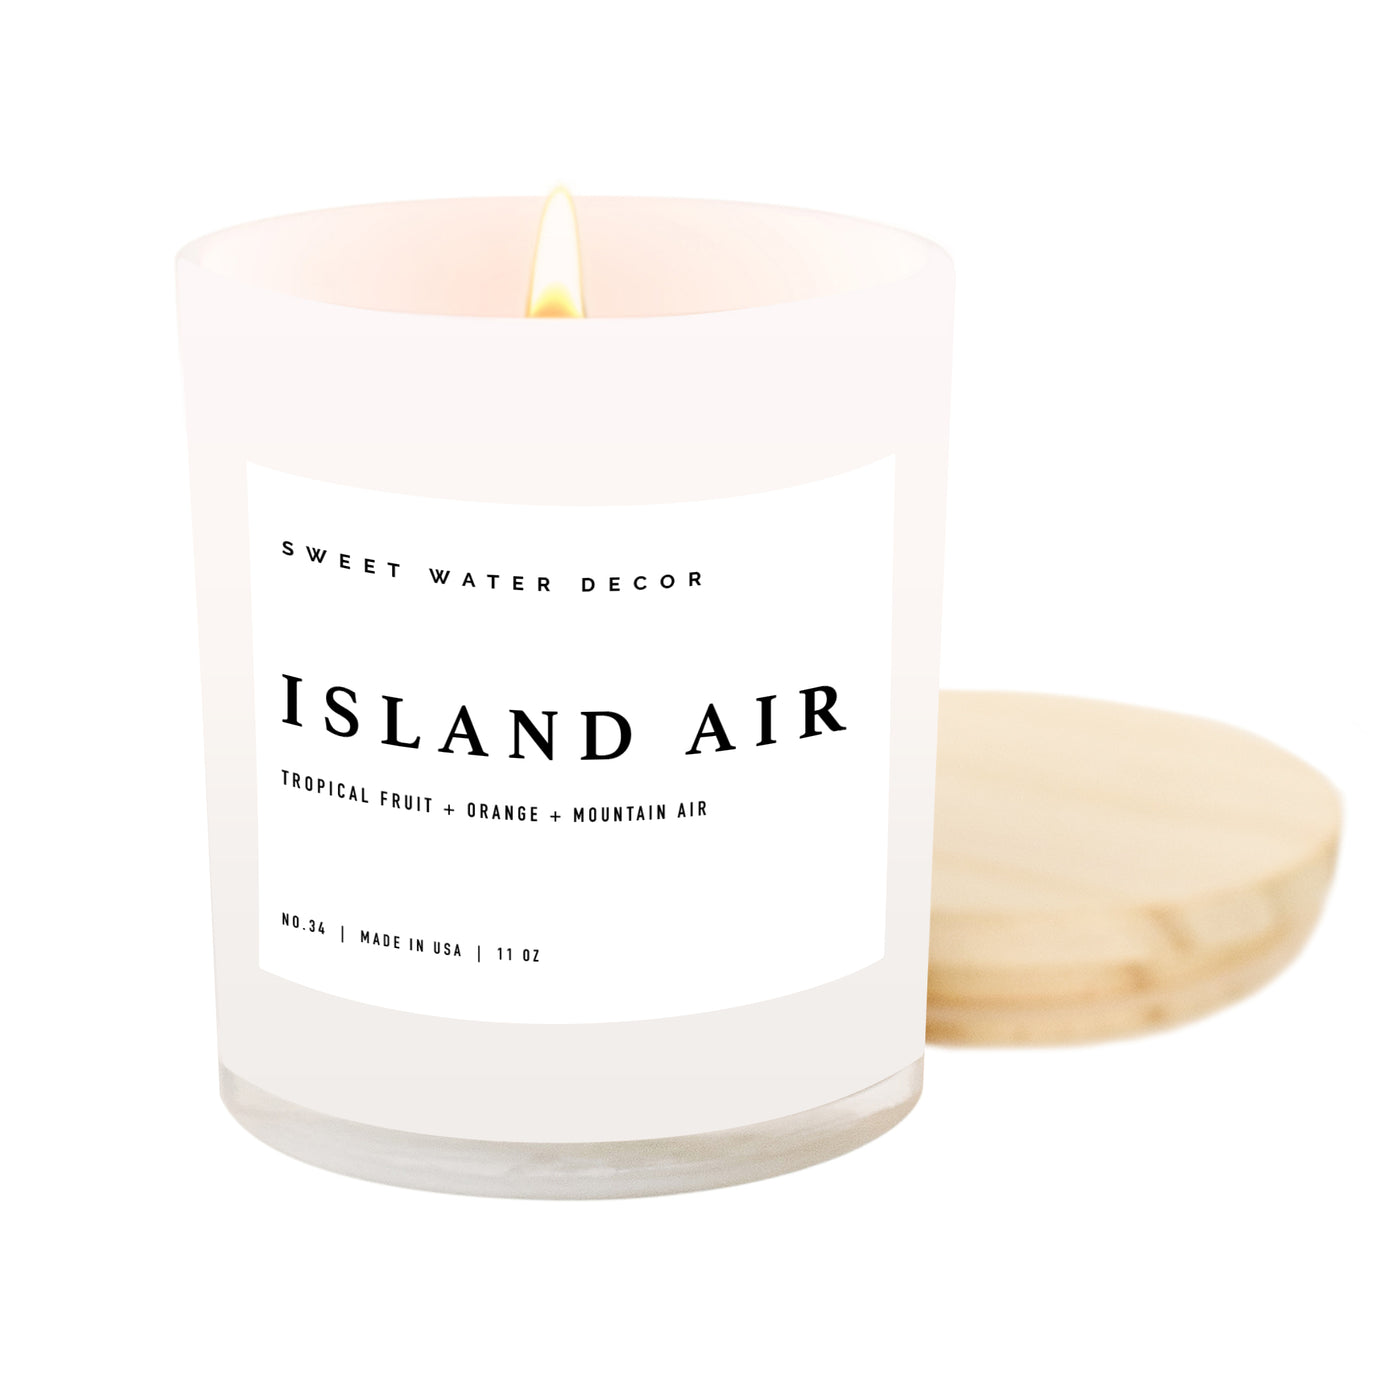 Island Air Soy Candle - White Jar - 11 oz - Sweet Water Decor - Candles